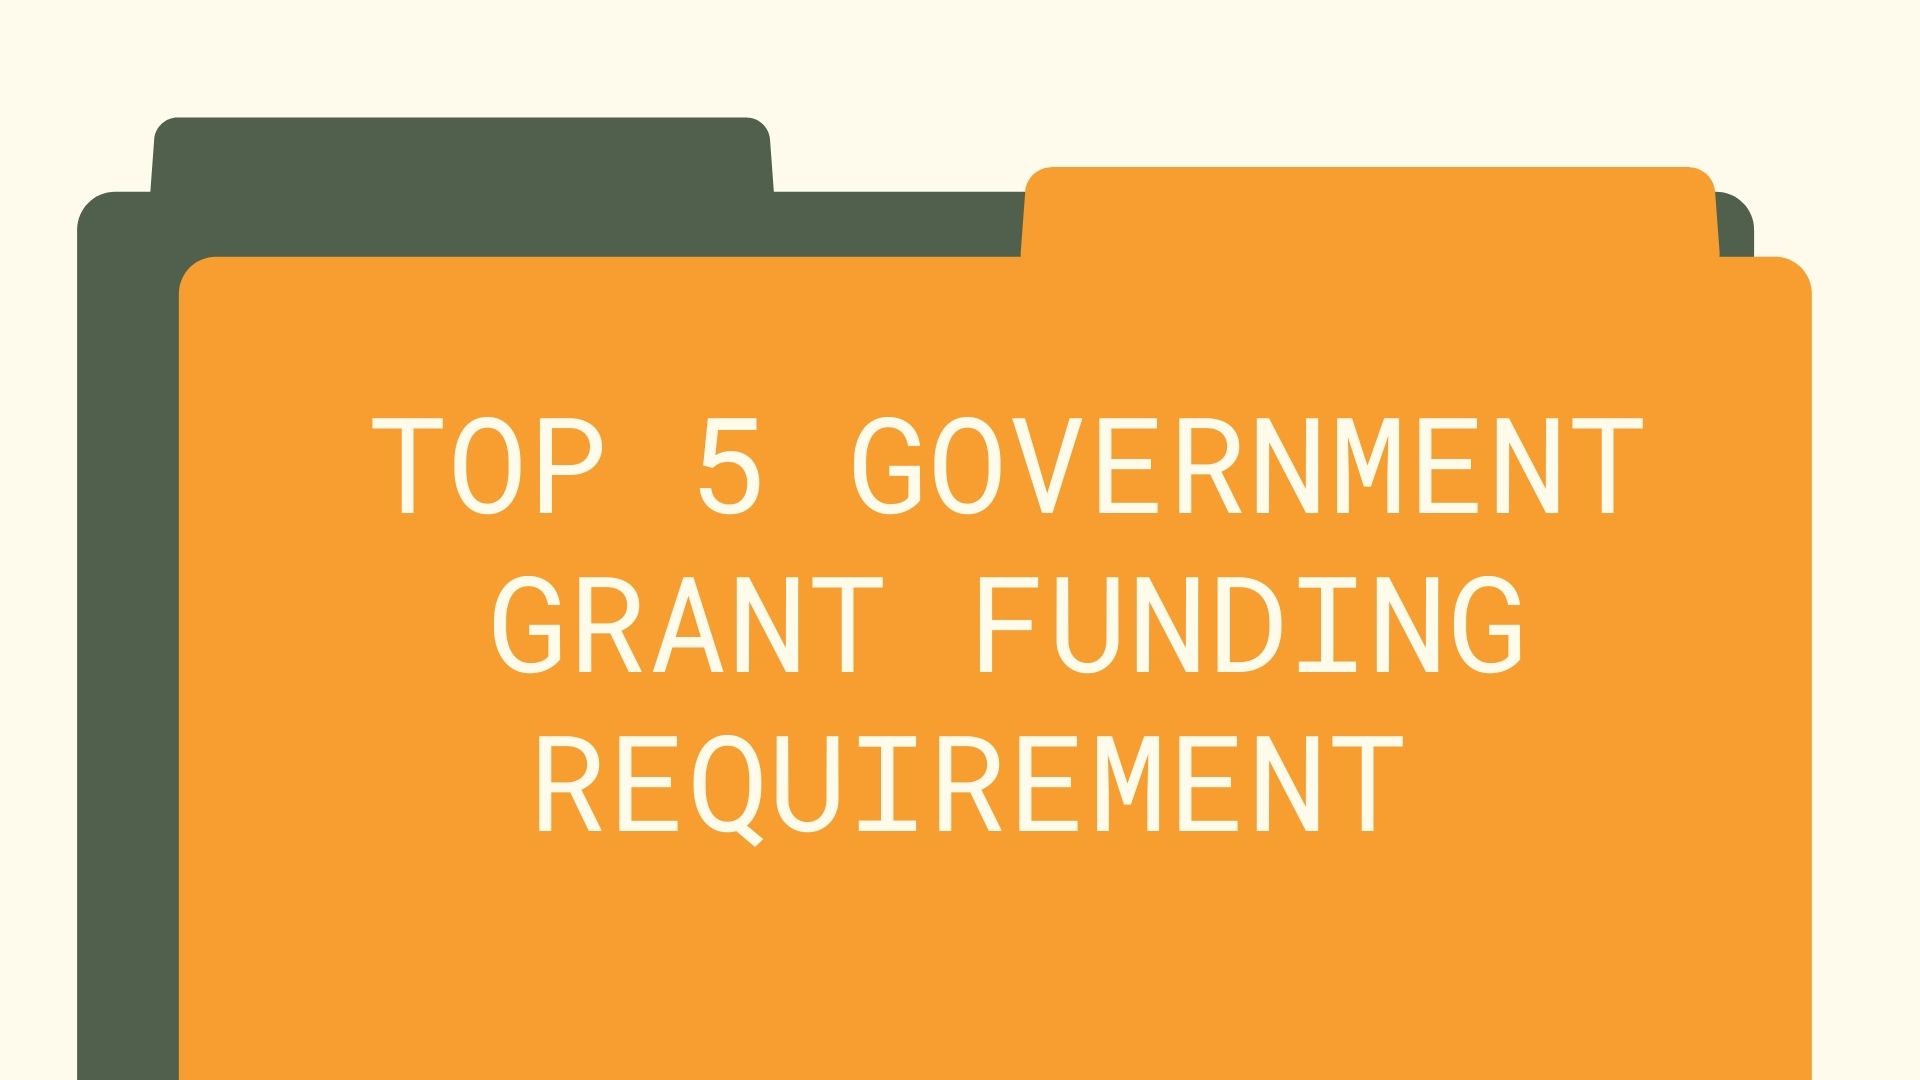 Top 5 government grant funding requirement